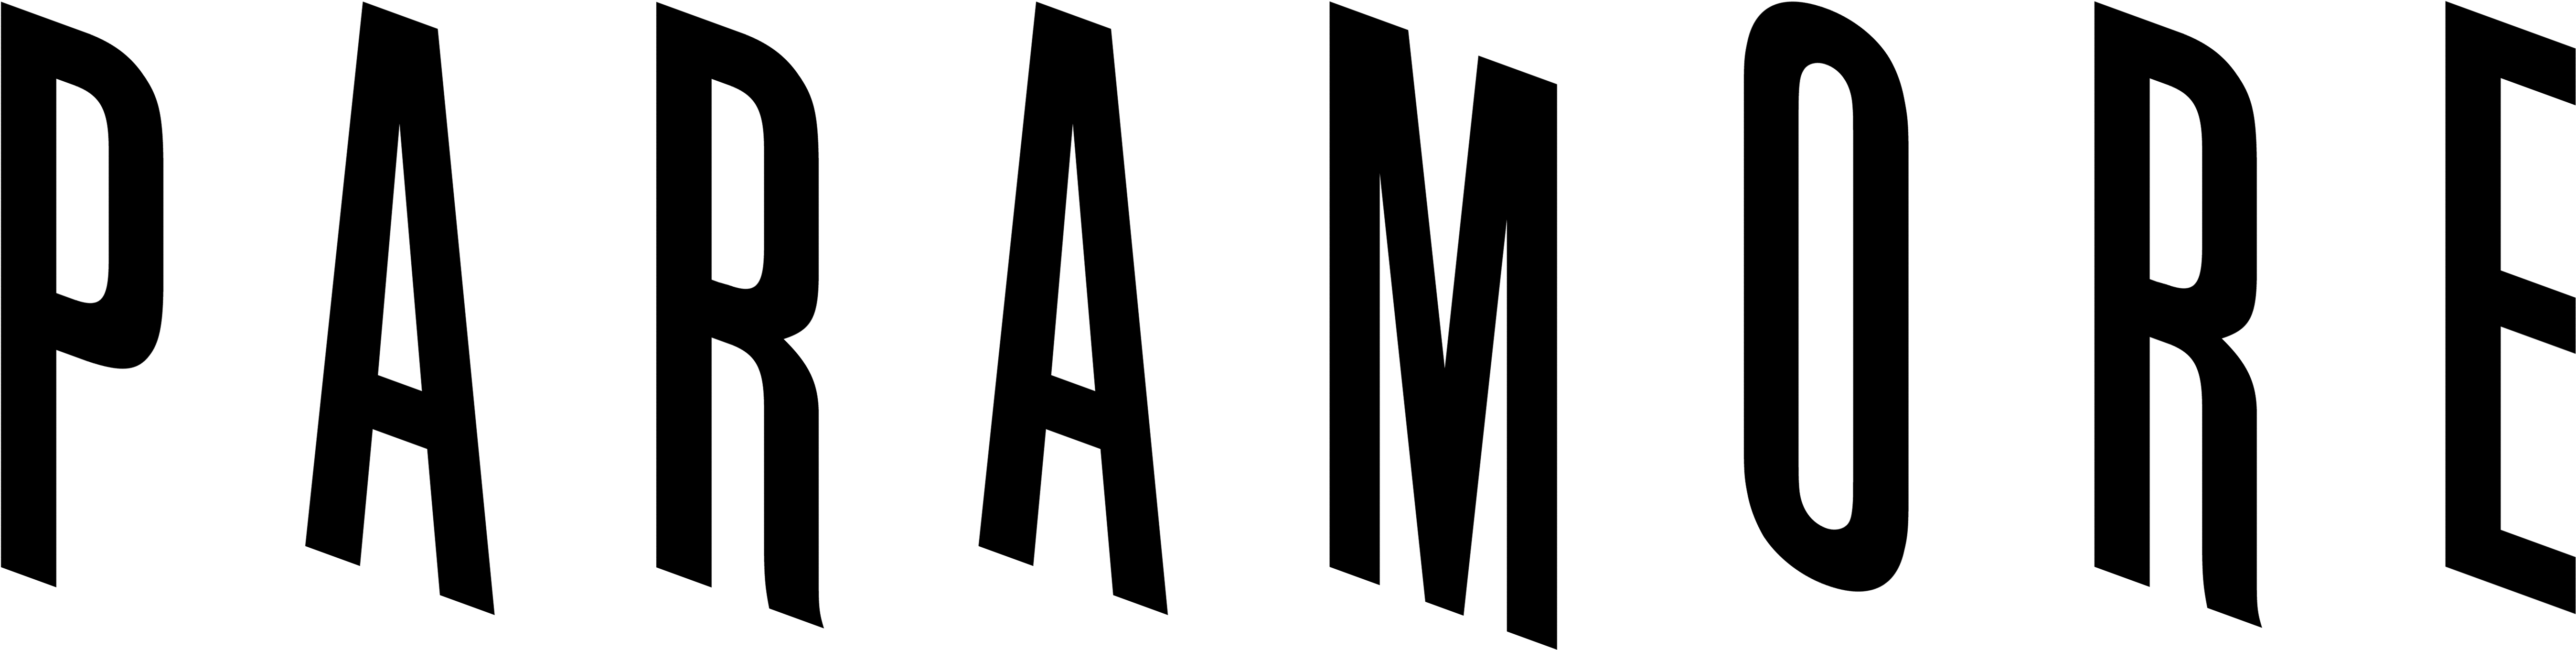 Hd Logo - Paramore Logo After Laughter (5498x1465)